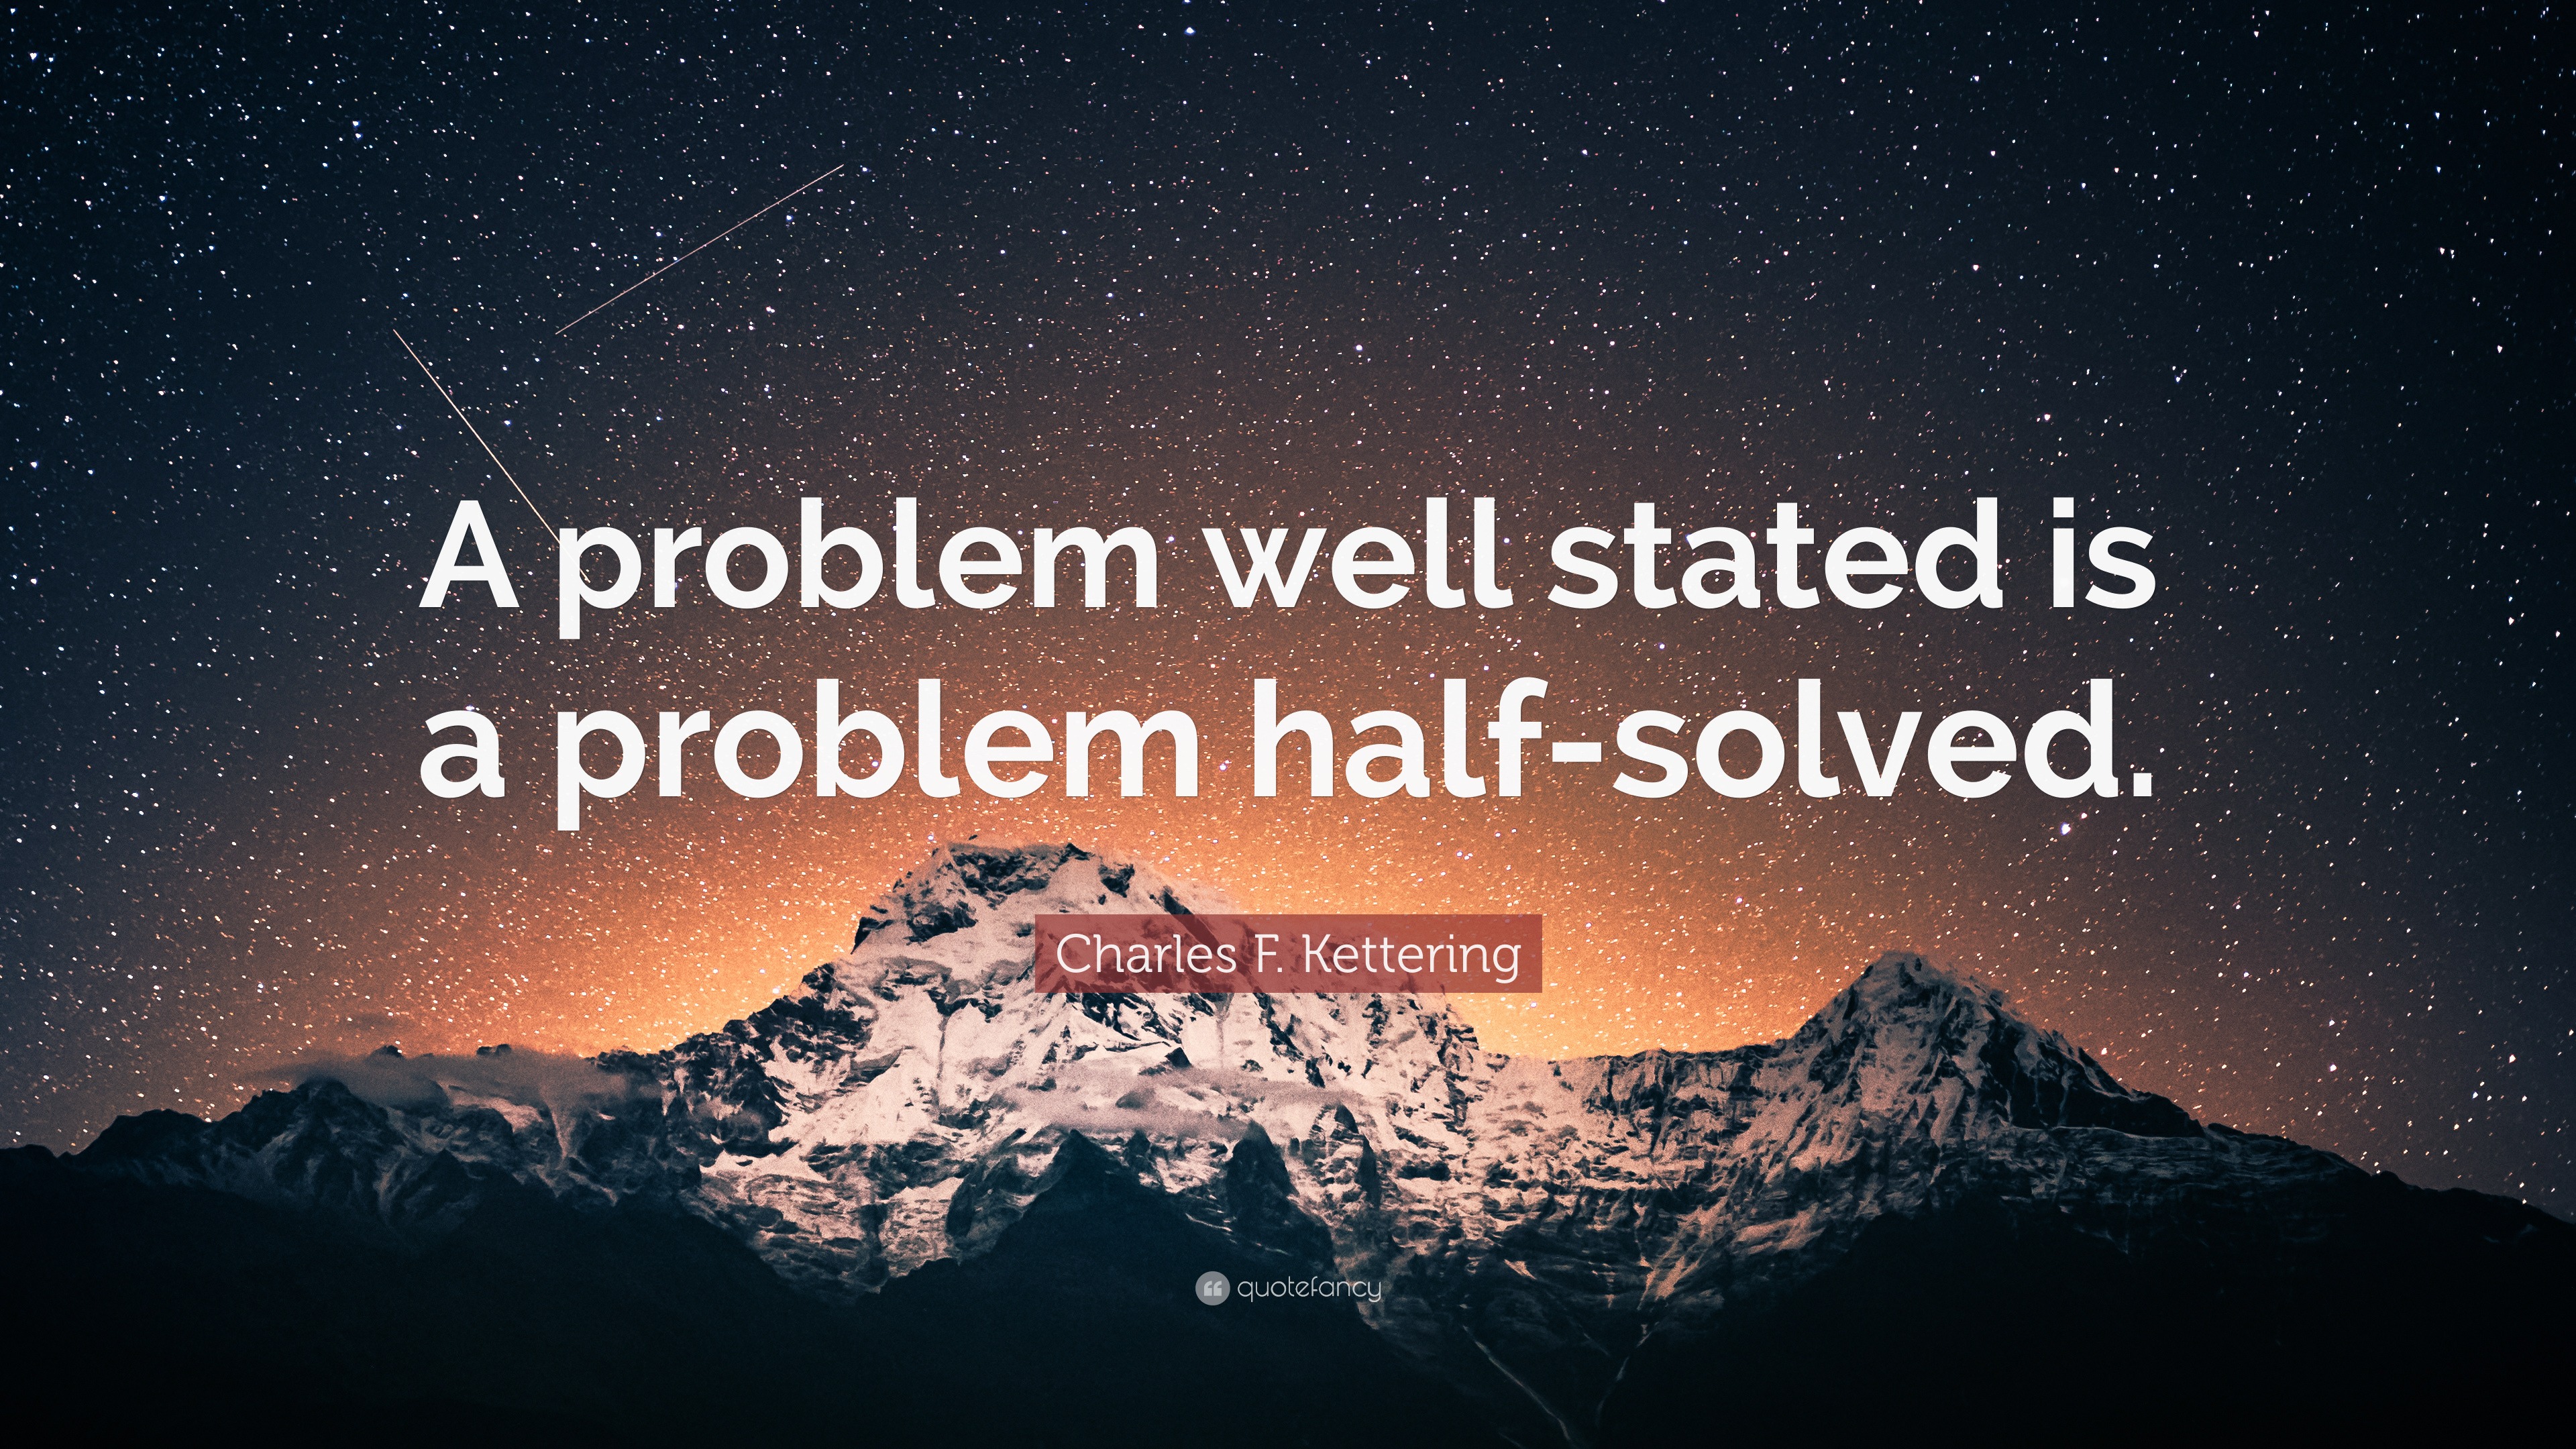 the problem well stated is half solved